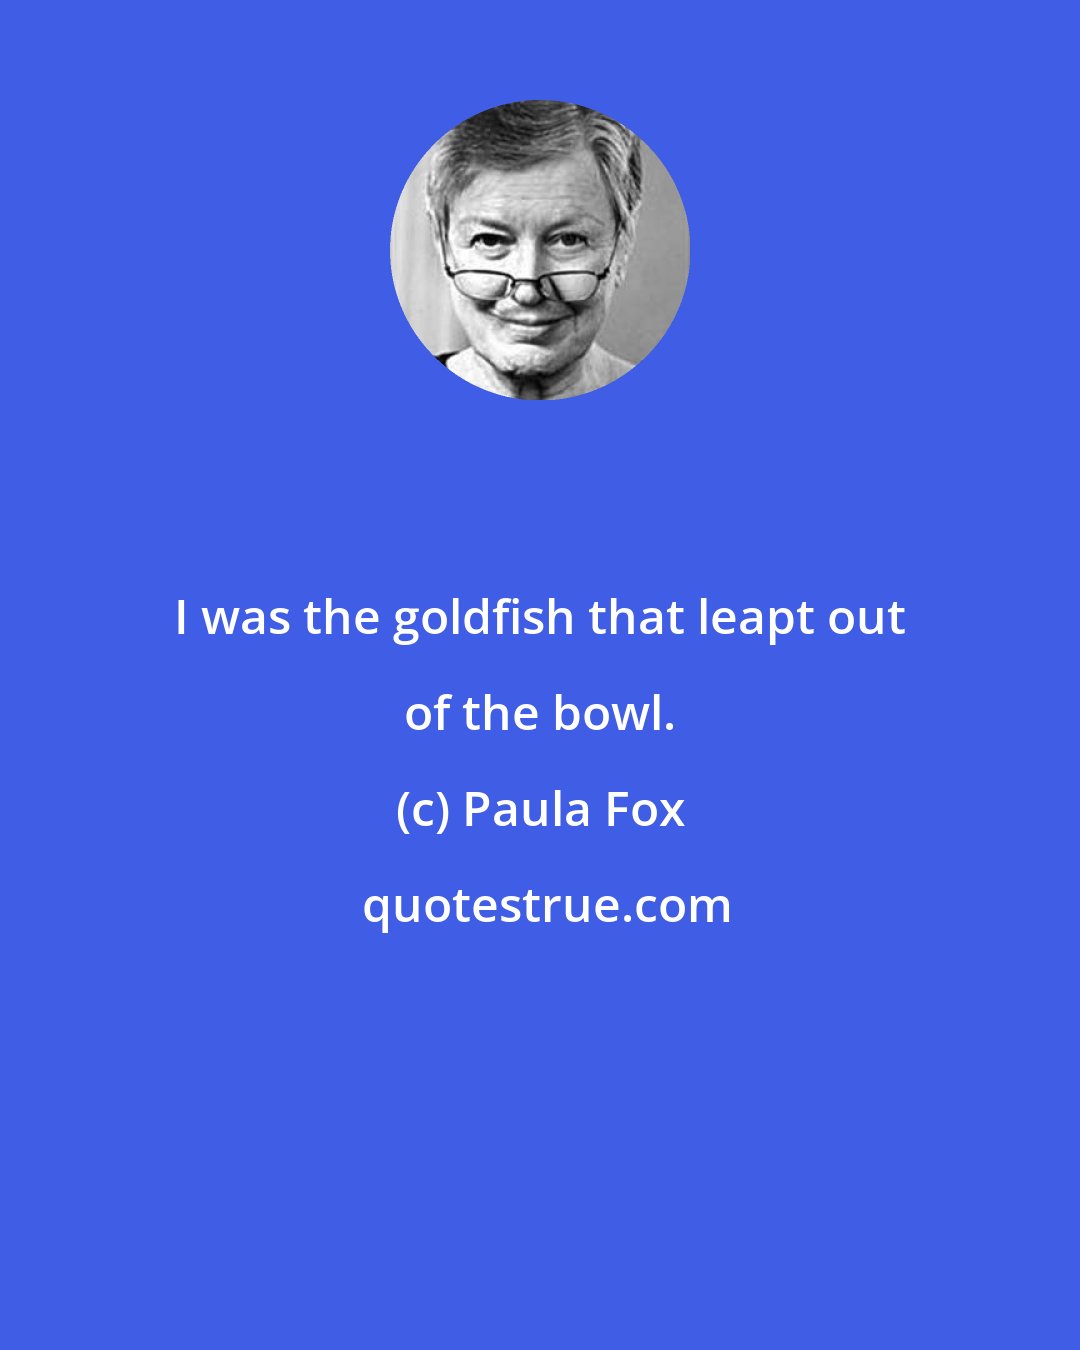 Paula Fox: I was the goldfish that leapt out of the bowl.